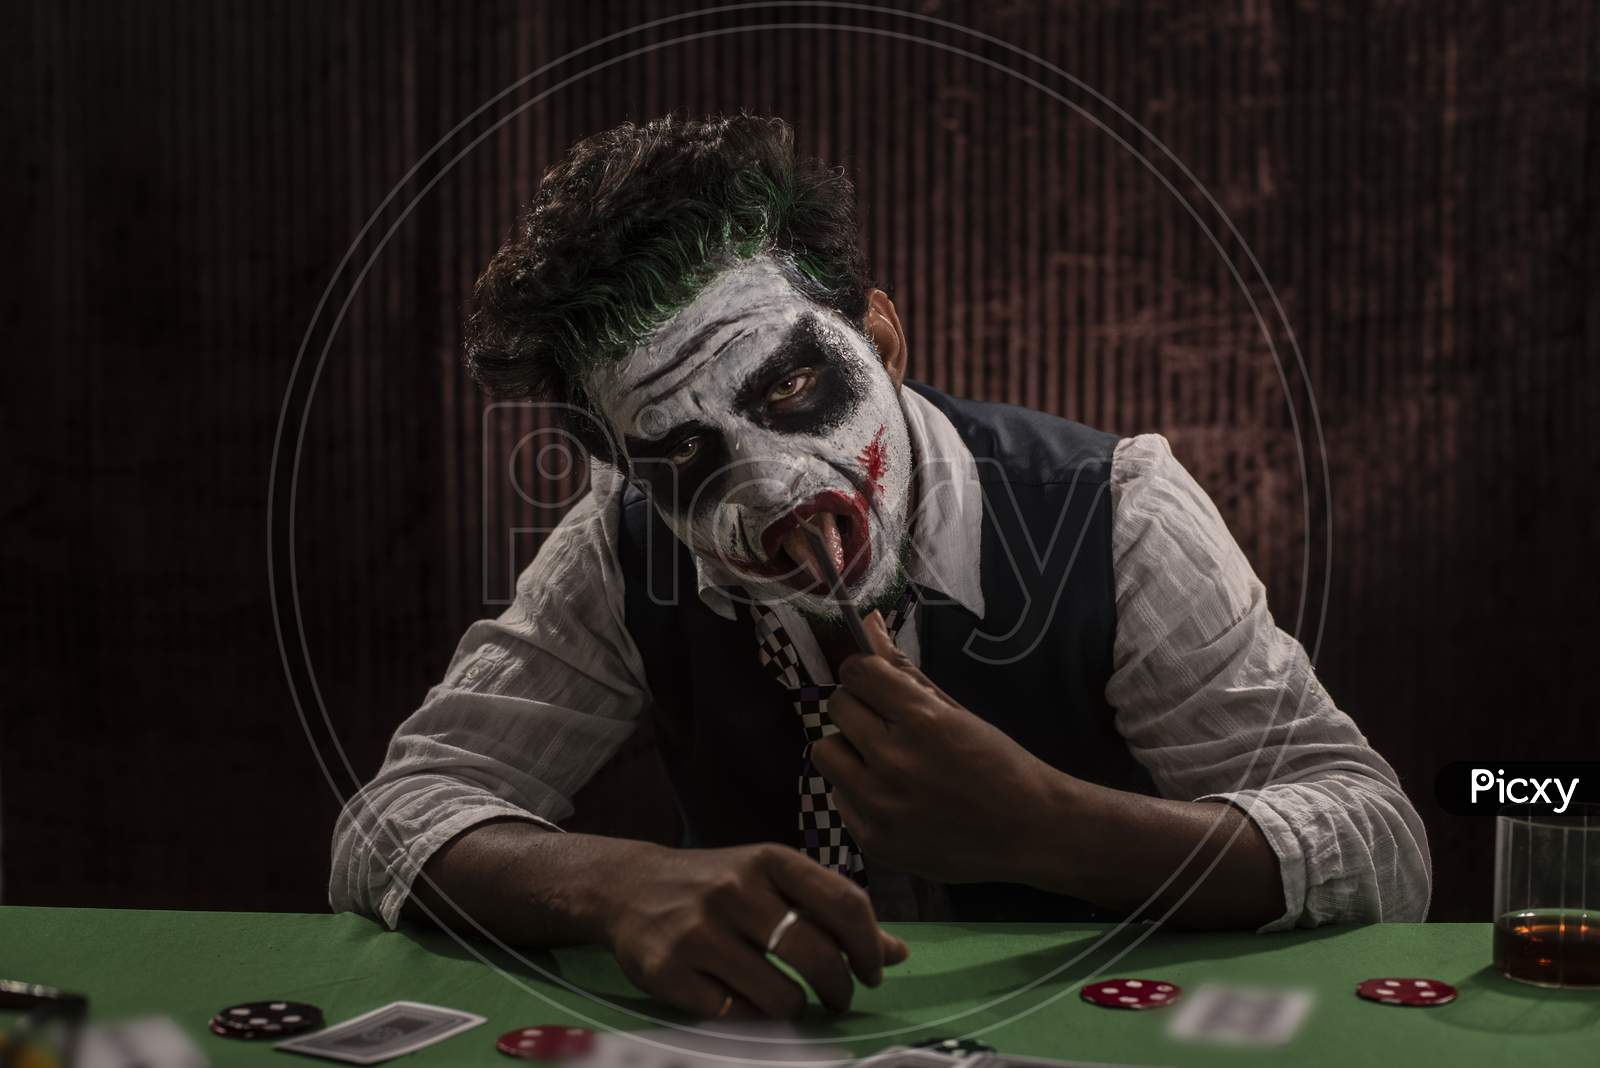 Portrait of an Indian man in Halloween Joker costume showing scary facial expression in front of a casino poker table. Cosplay photography.